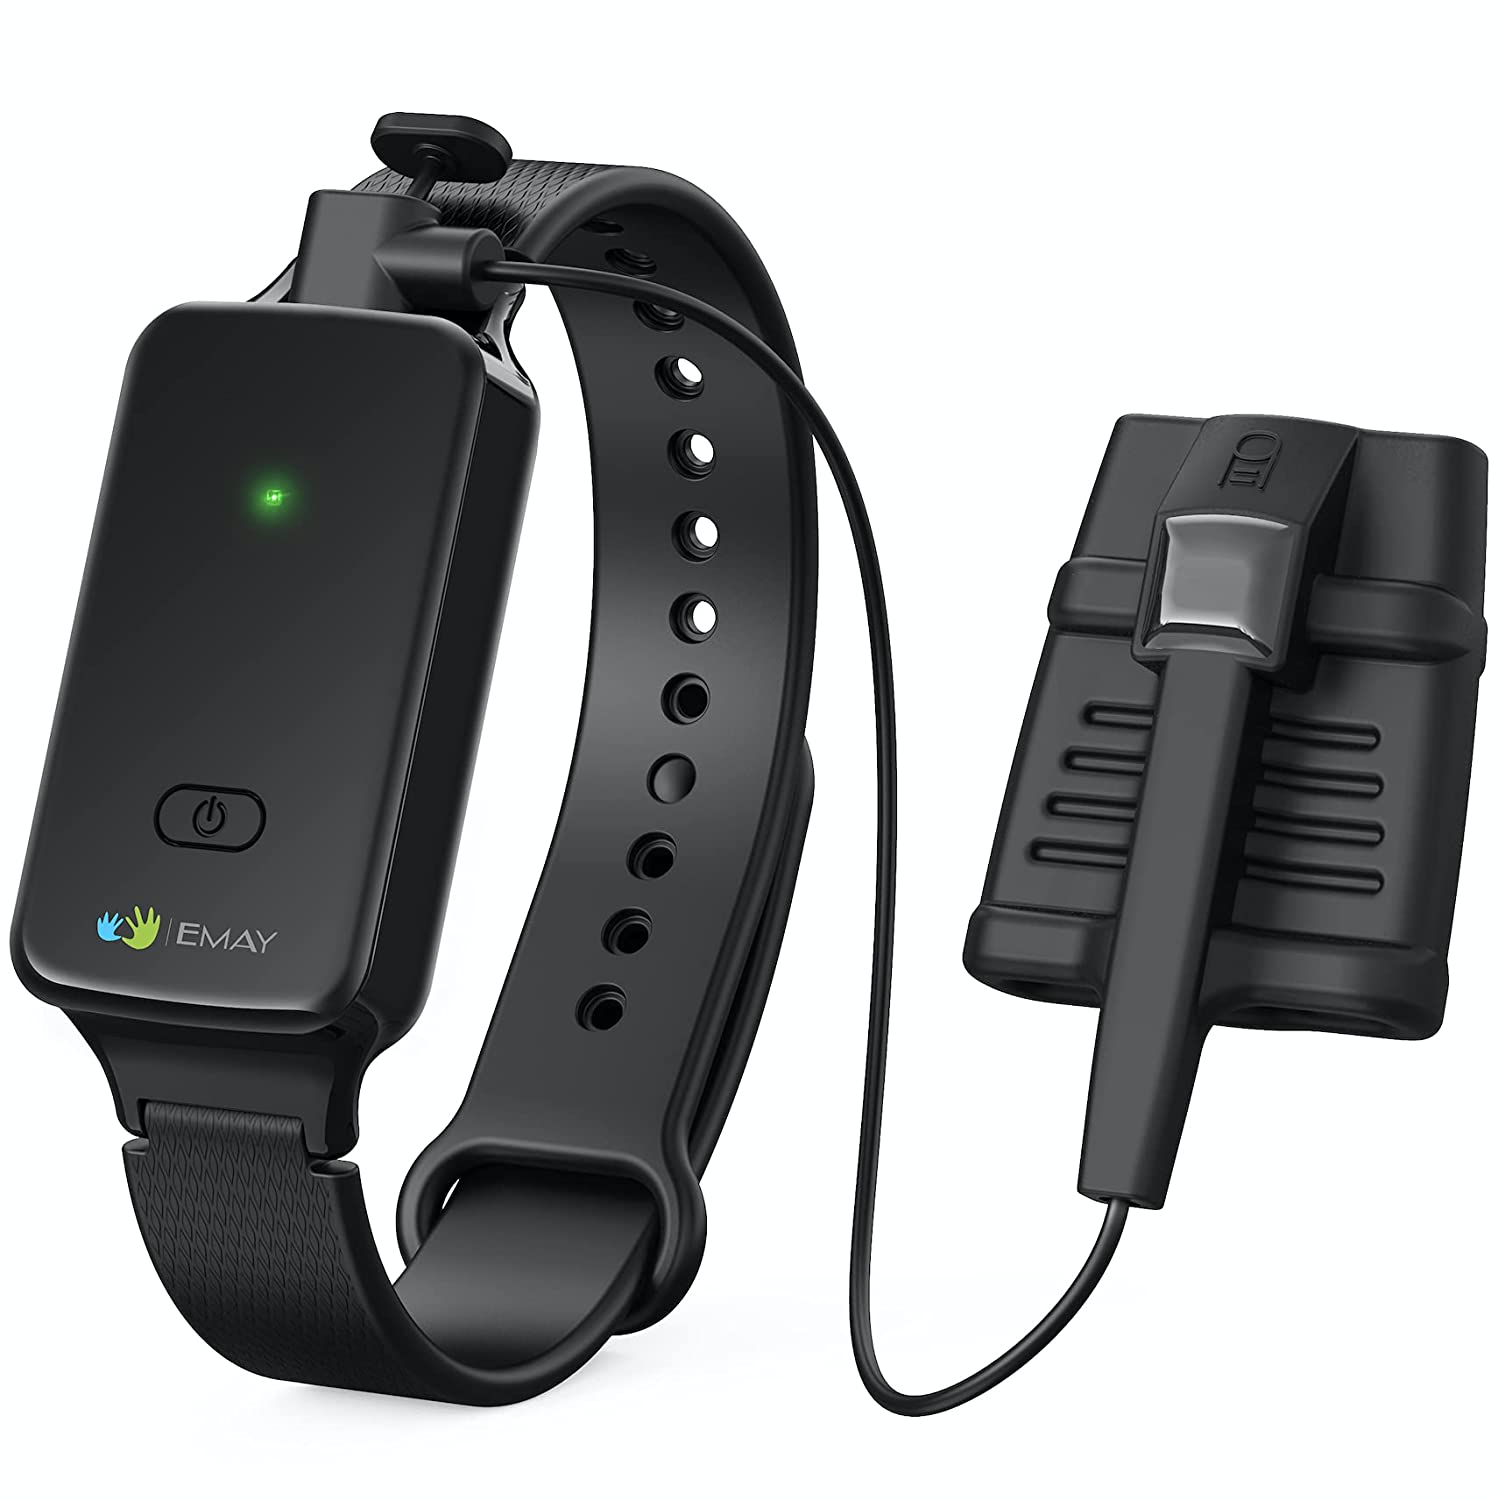 SleepO2 Wrist Pulse Oximeter with Silicone SpO2 Sensor | Bluetooth Sleep Oxygen Monitor Rechargeable for Continuous Blood Oxygen and Heart Rate Tracking | Free App with Overnight Report